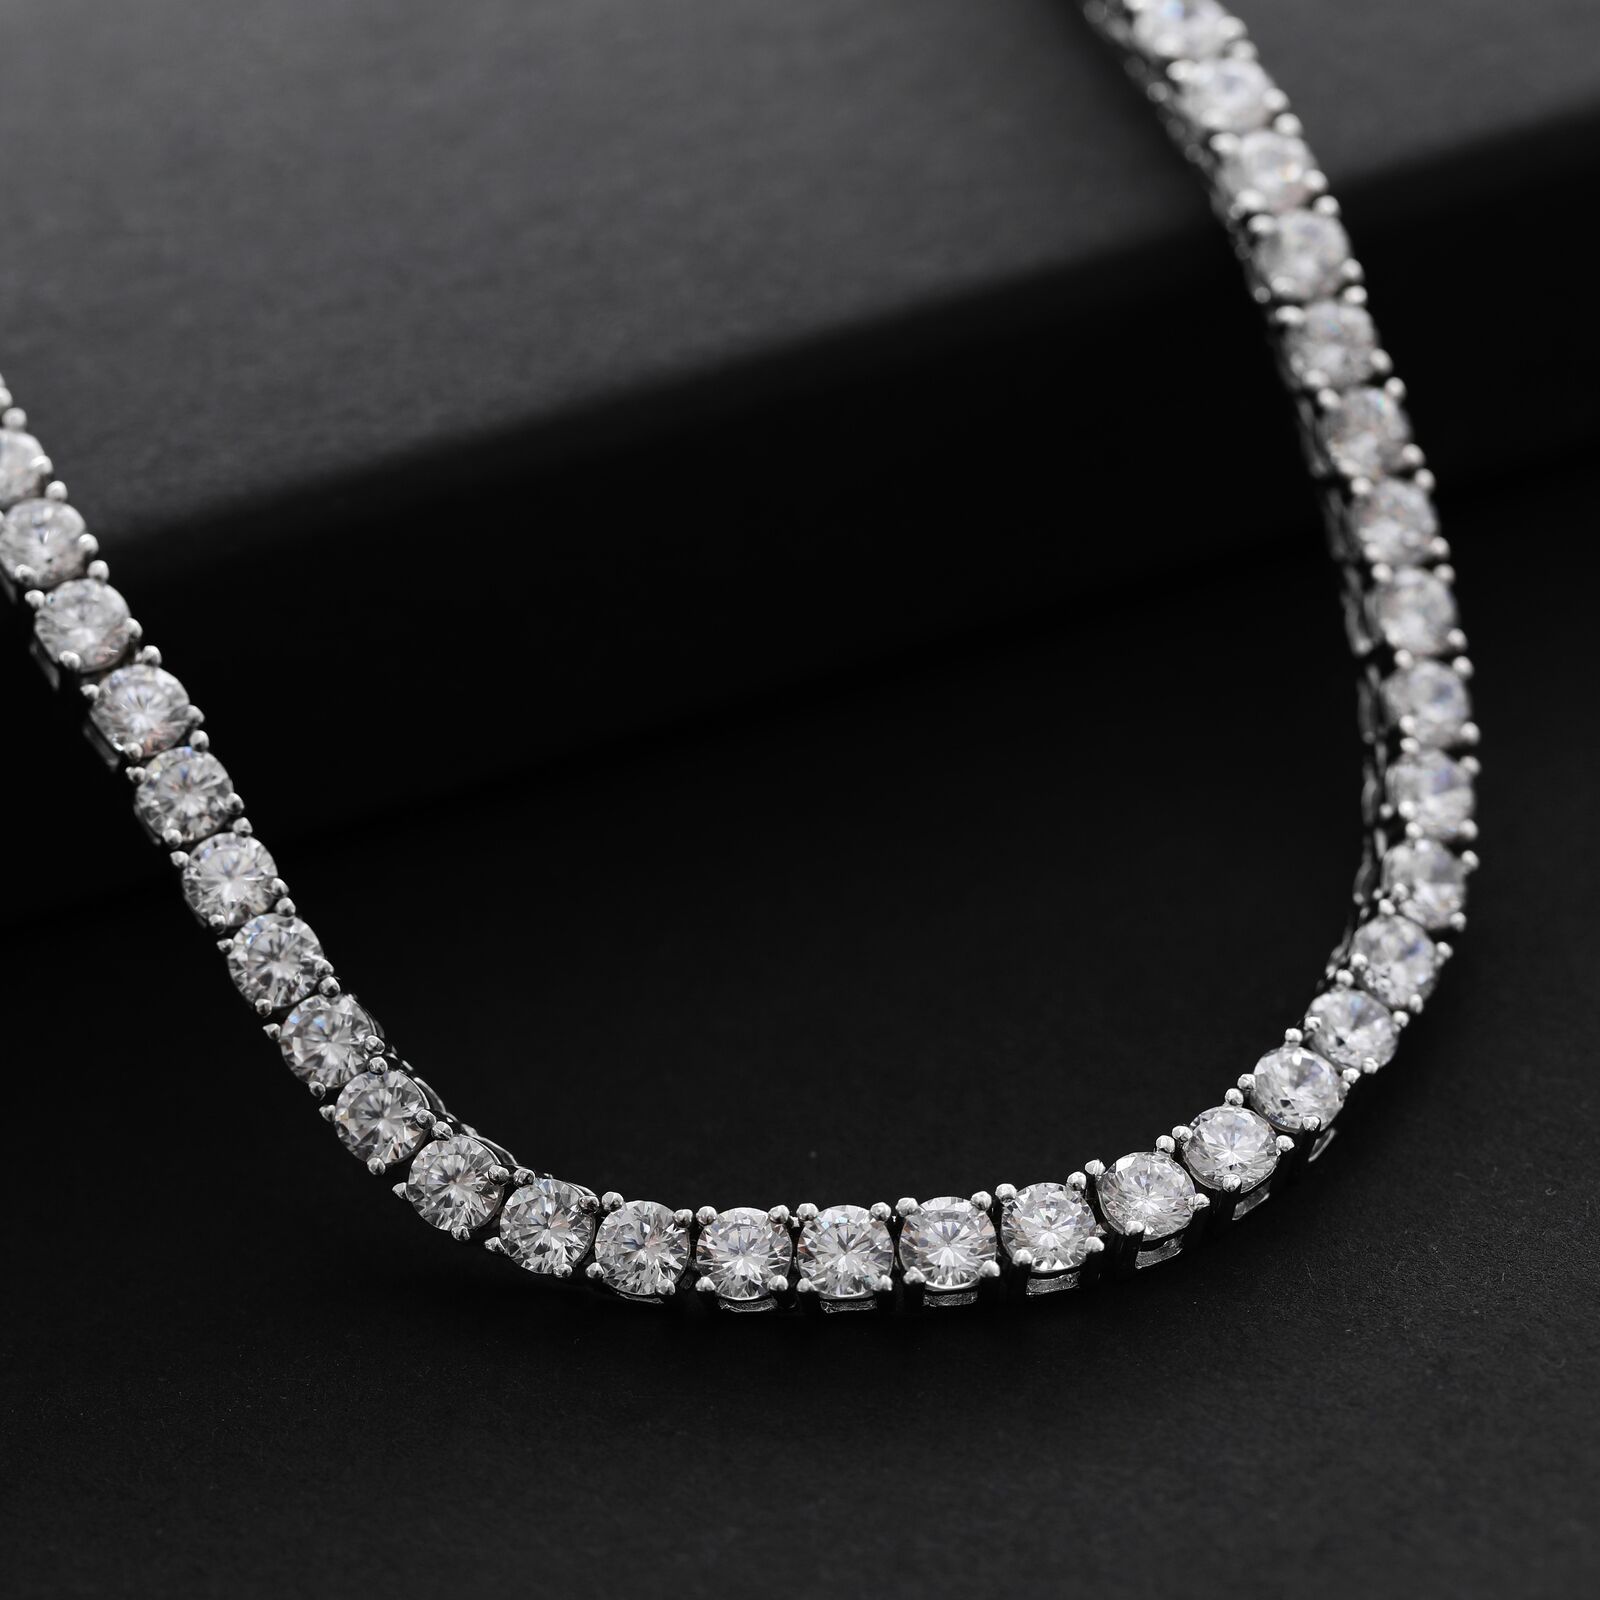 100% 925 Sterling Silver Full 3Mm/4Mm Luxury High Carbon Diamond Tennis Chains